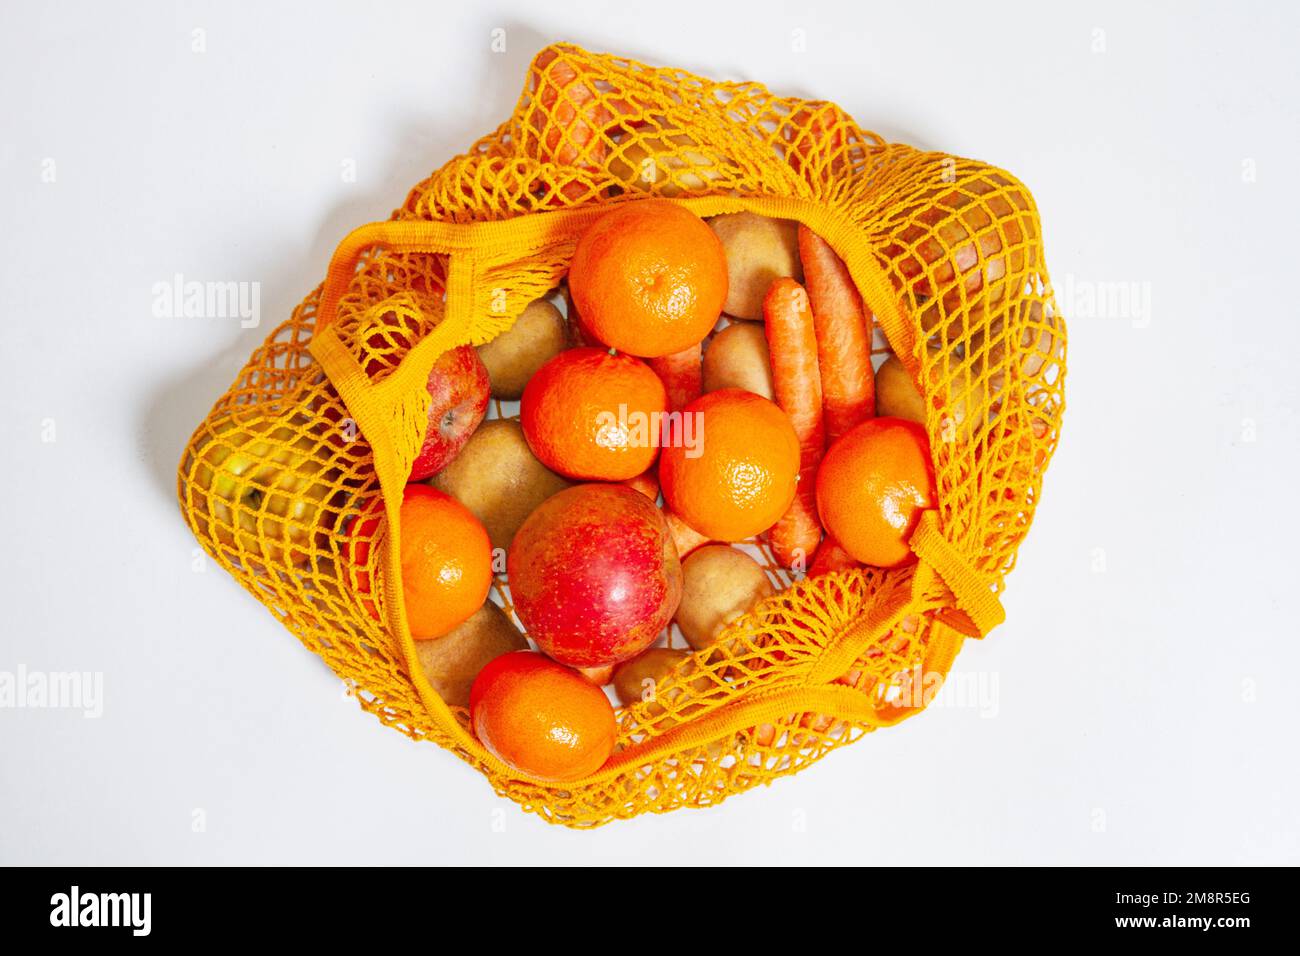 Orange mesh bag. View from above. Fresh vegetables and fruits from the farmers' market. Raw potatoes, raw carrots, apples, tangerines, oranges. Consci Stock Photo